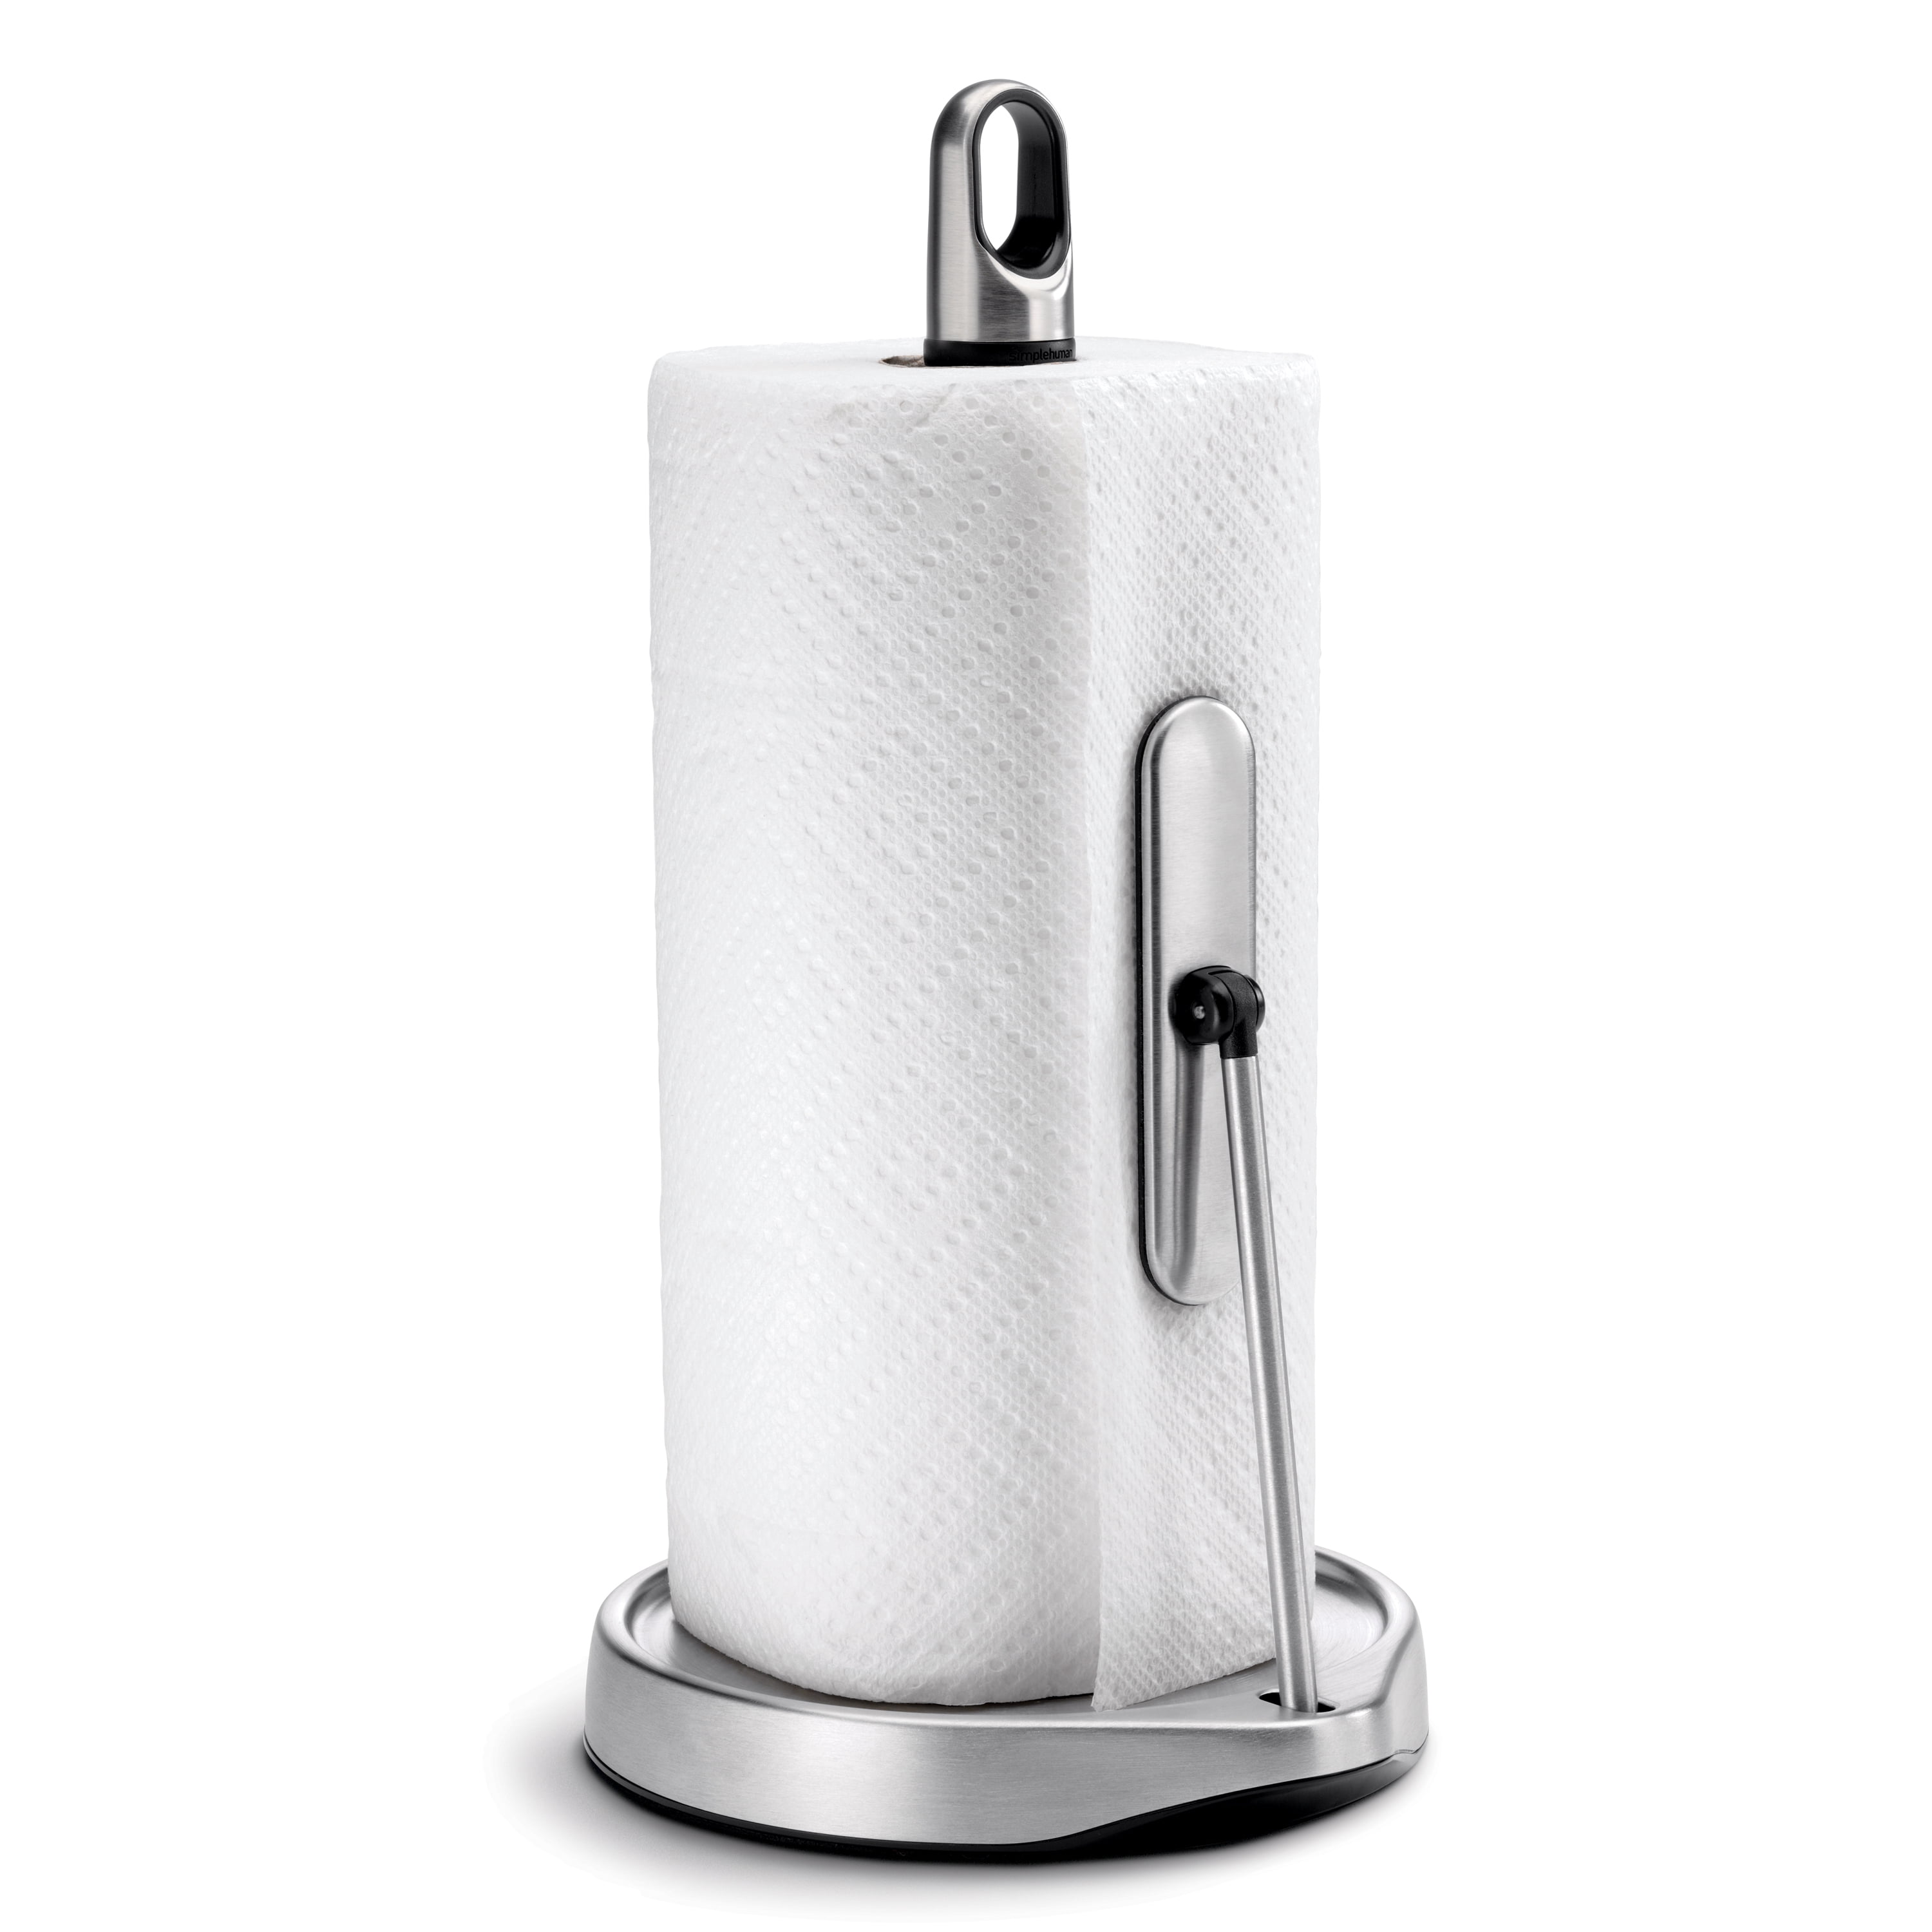 Steady Mounted Paper Towel Holder